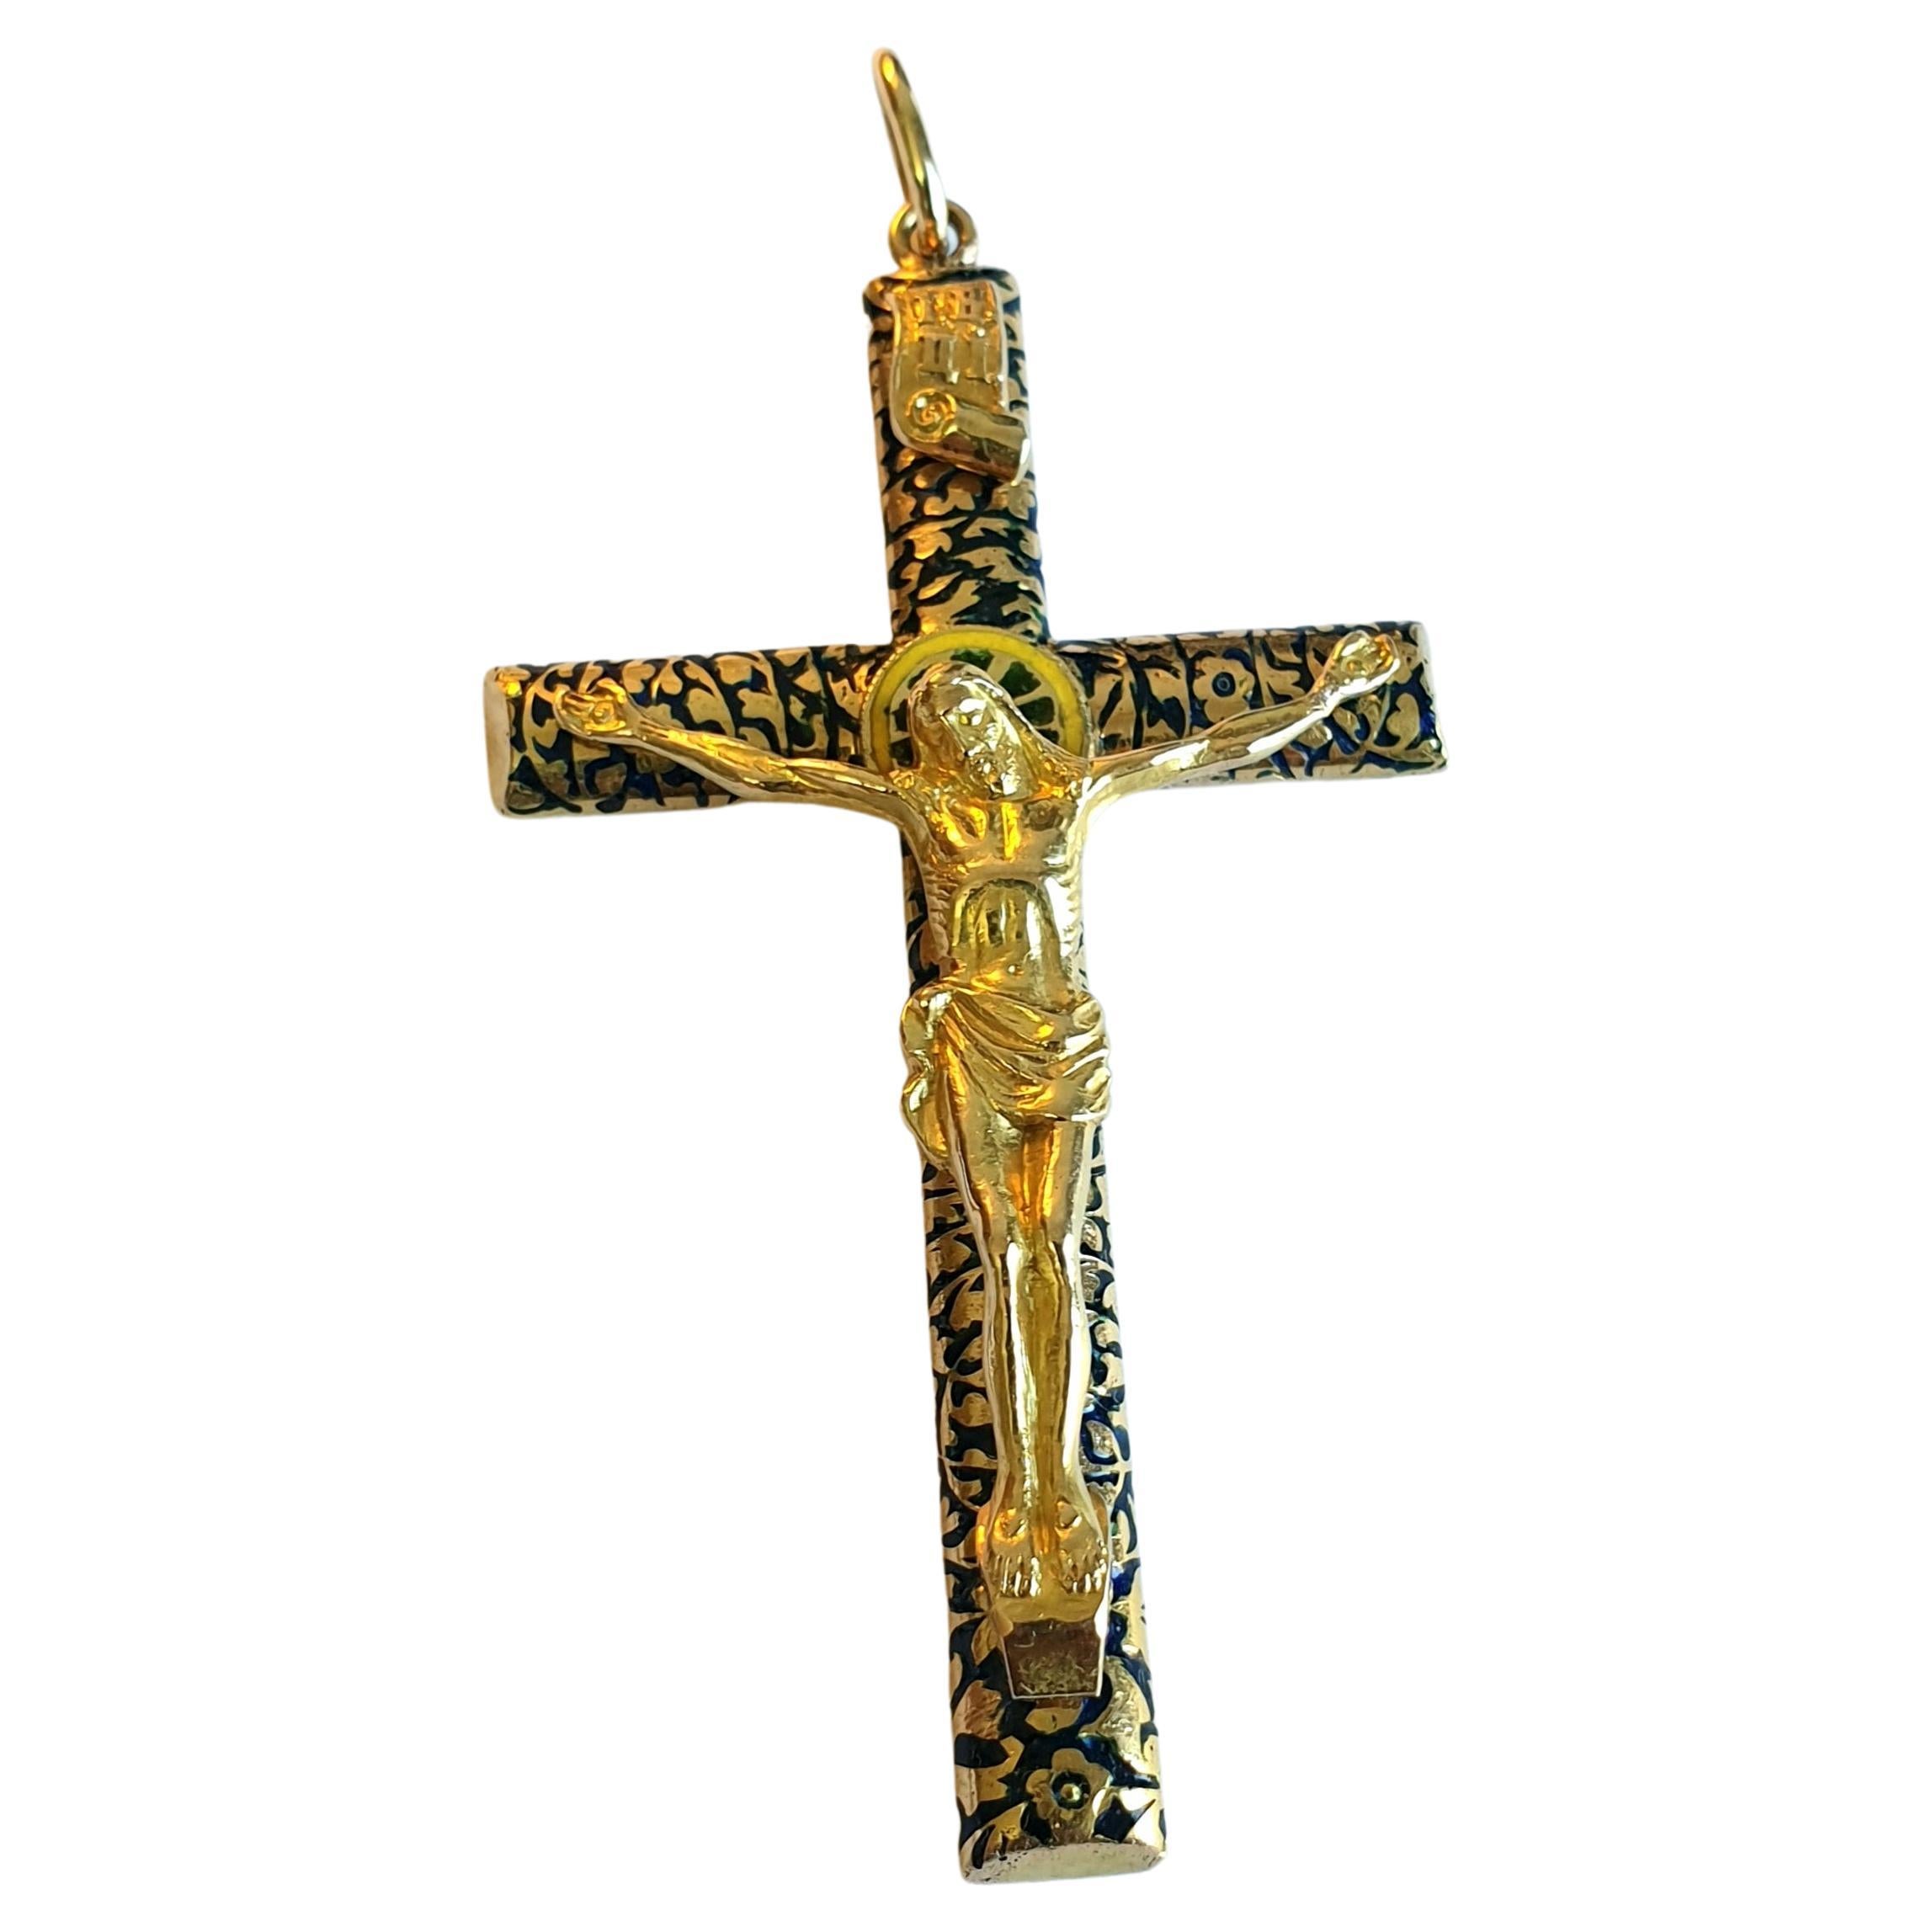 Antique Russian 14k gold large Cross pendant large in size 7cm length solid gold with jesus crist statue on cross front decorted with black enamel hall marked 56 imperial Russian gold standard and Moscow assay mark dates back to the Russian tsarist